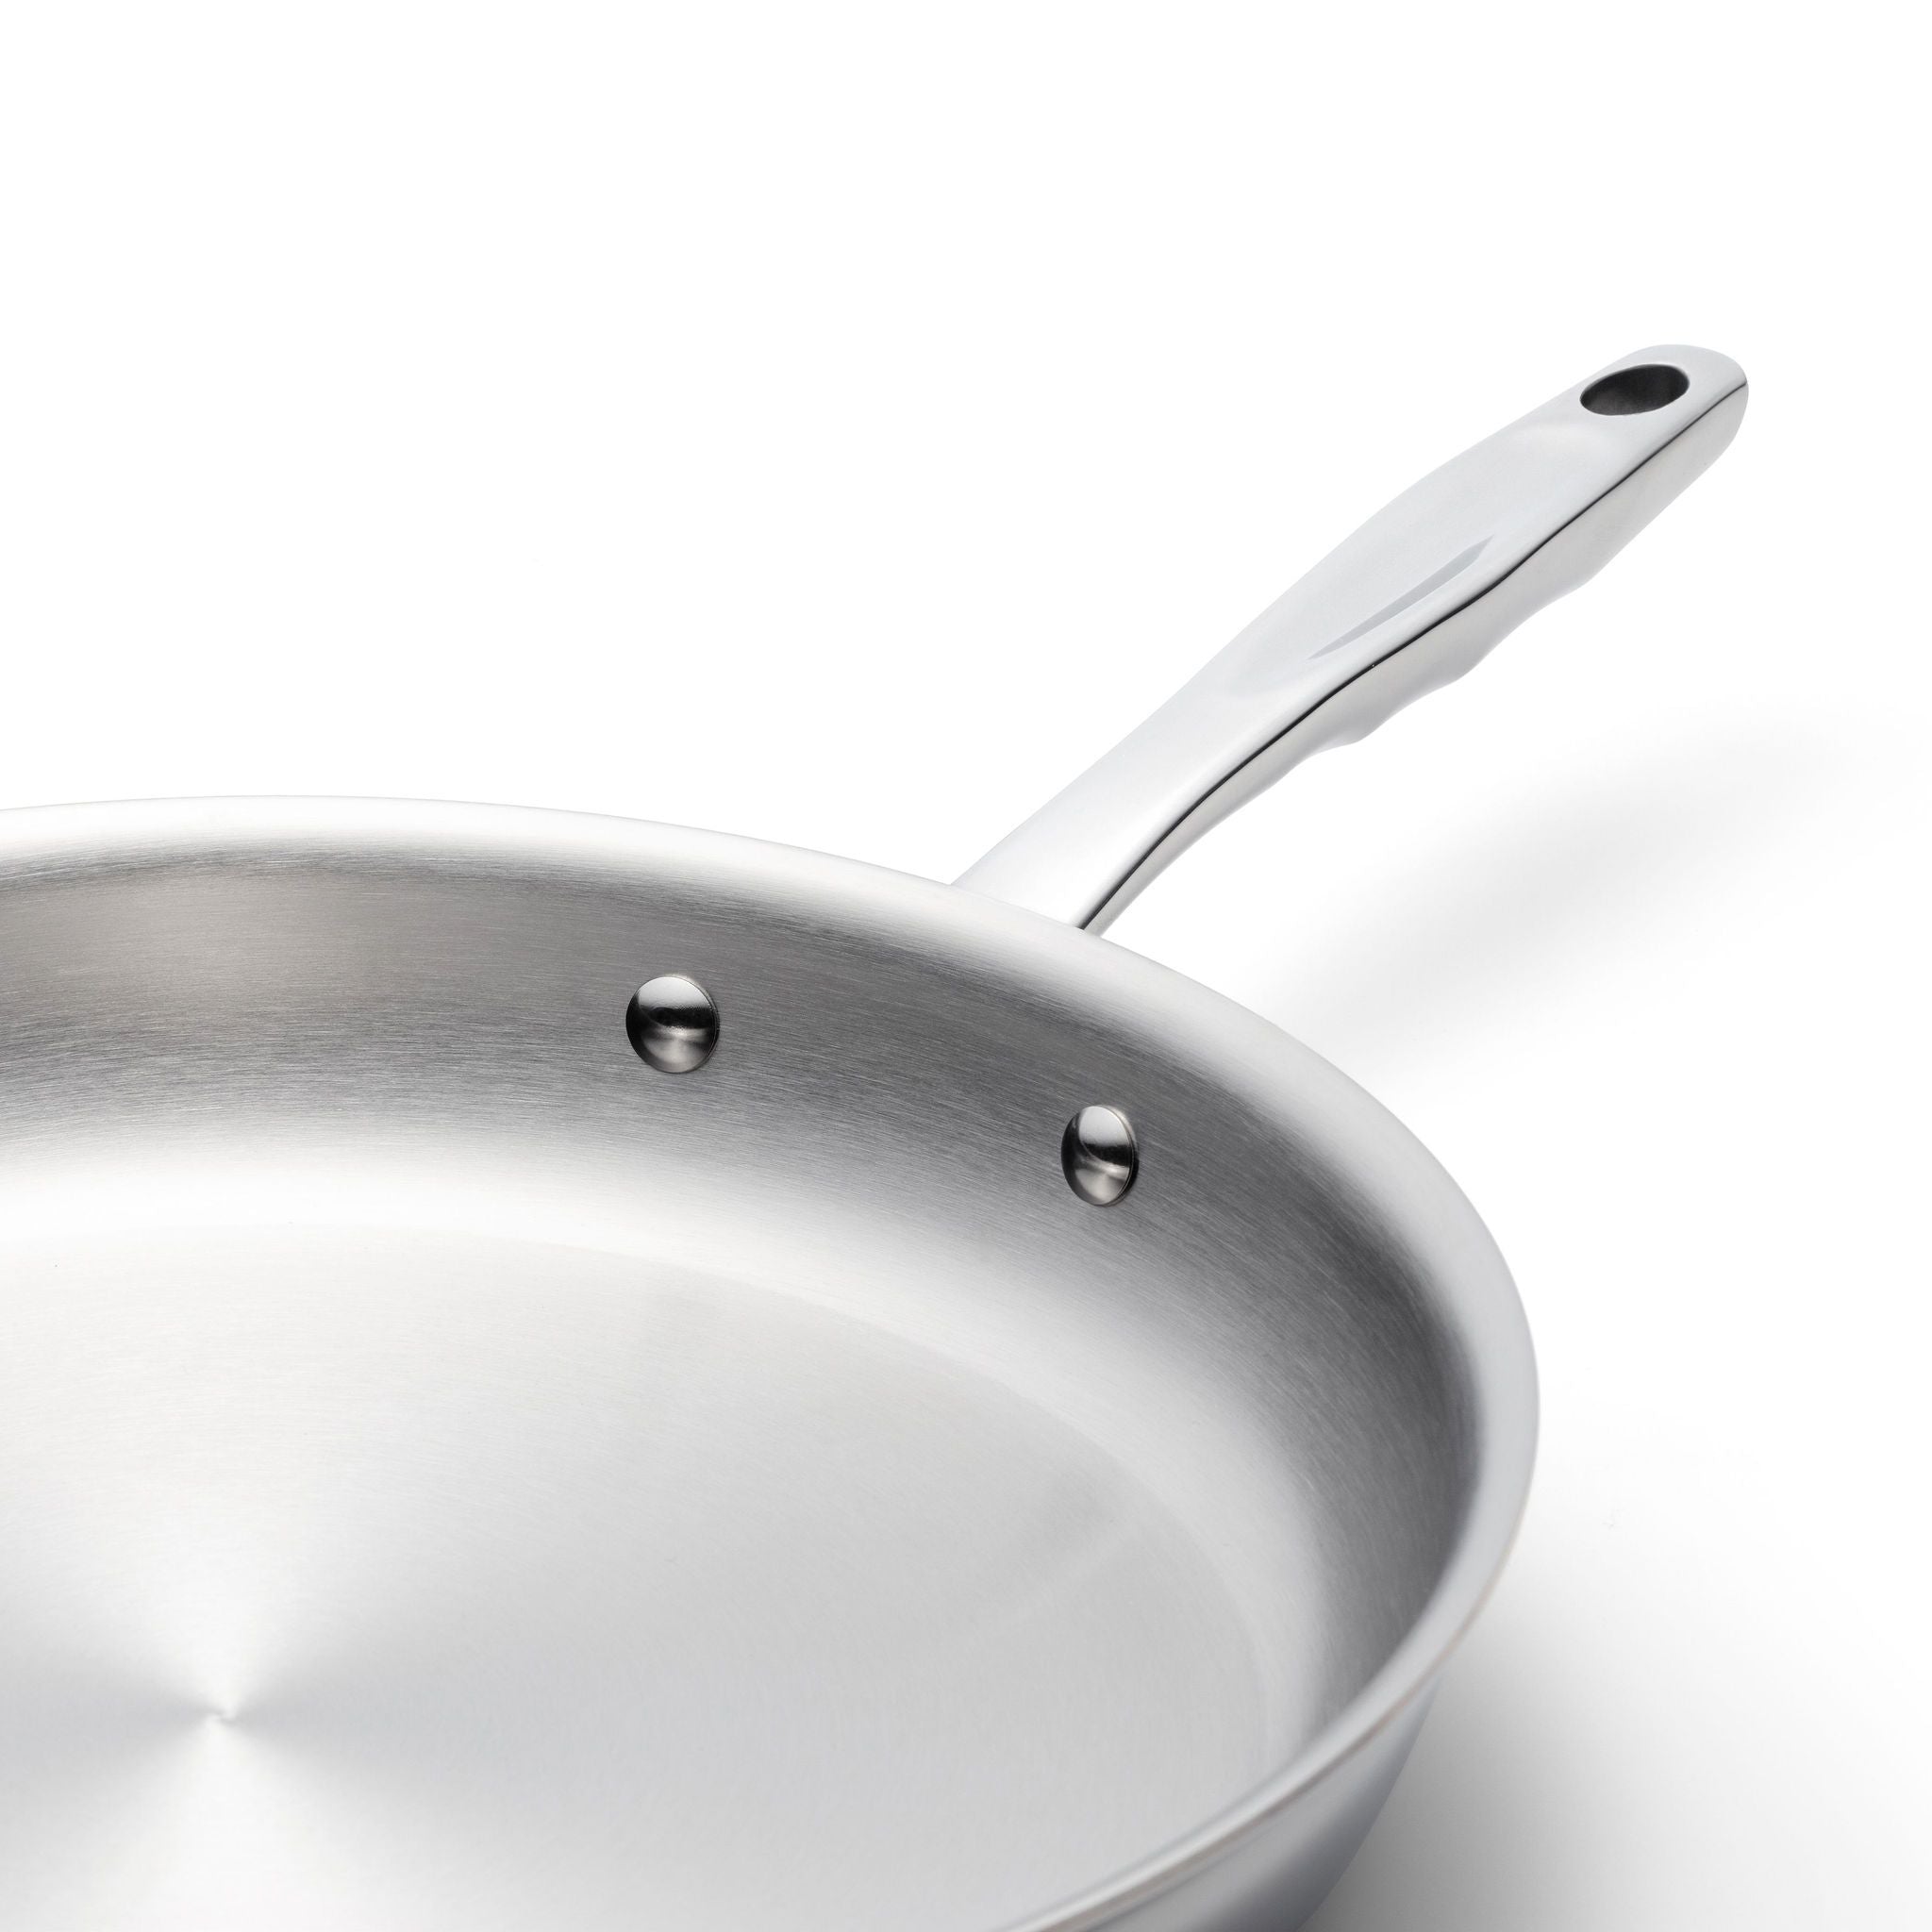 360 Cookware Stainless Steel 11.5 Inch Fry Pan